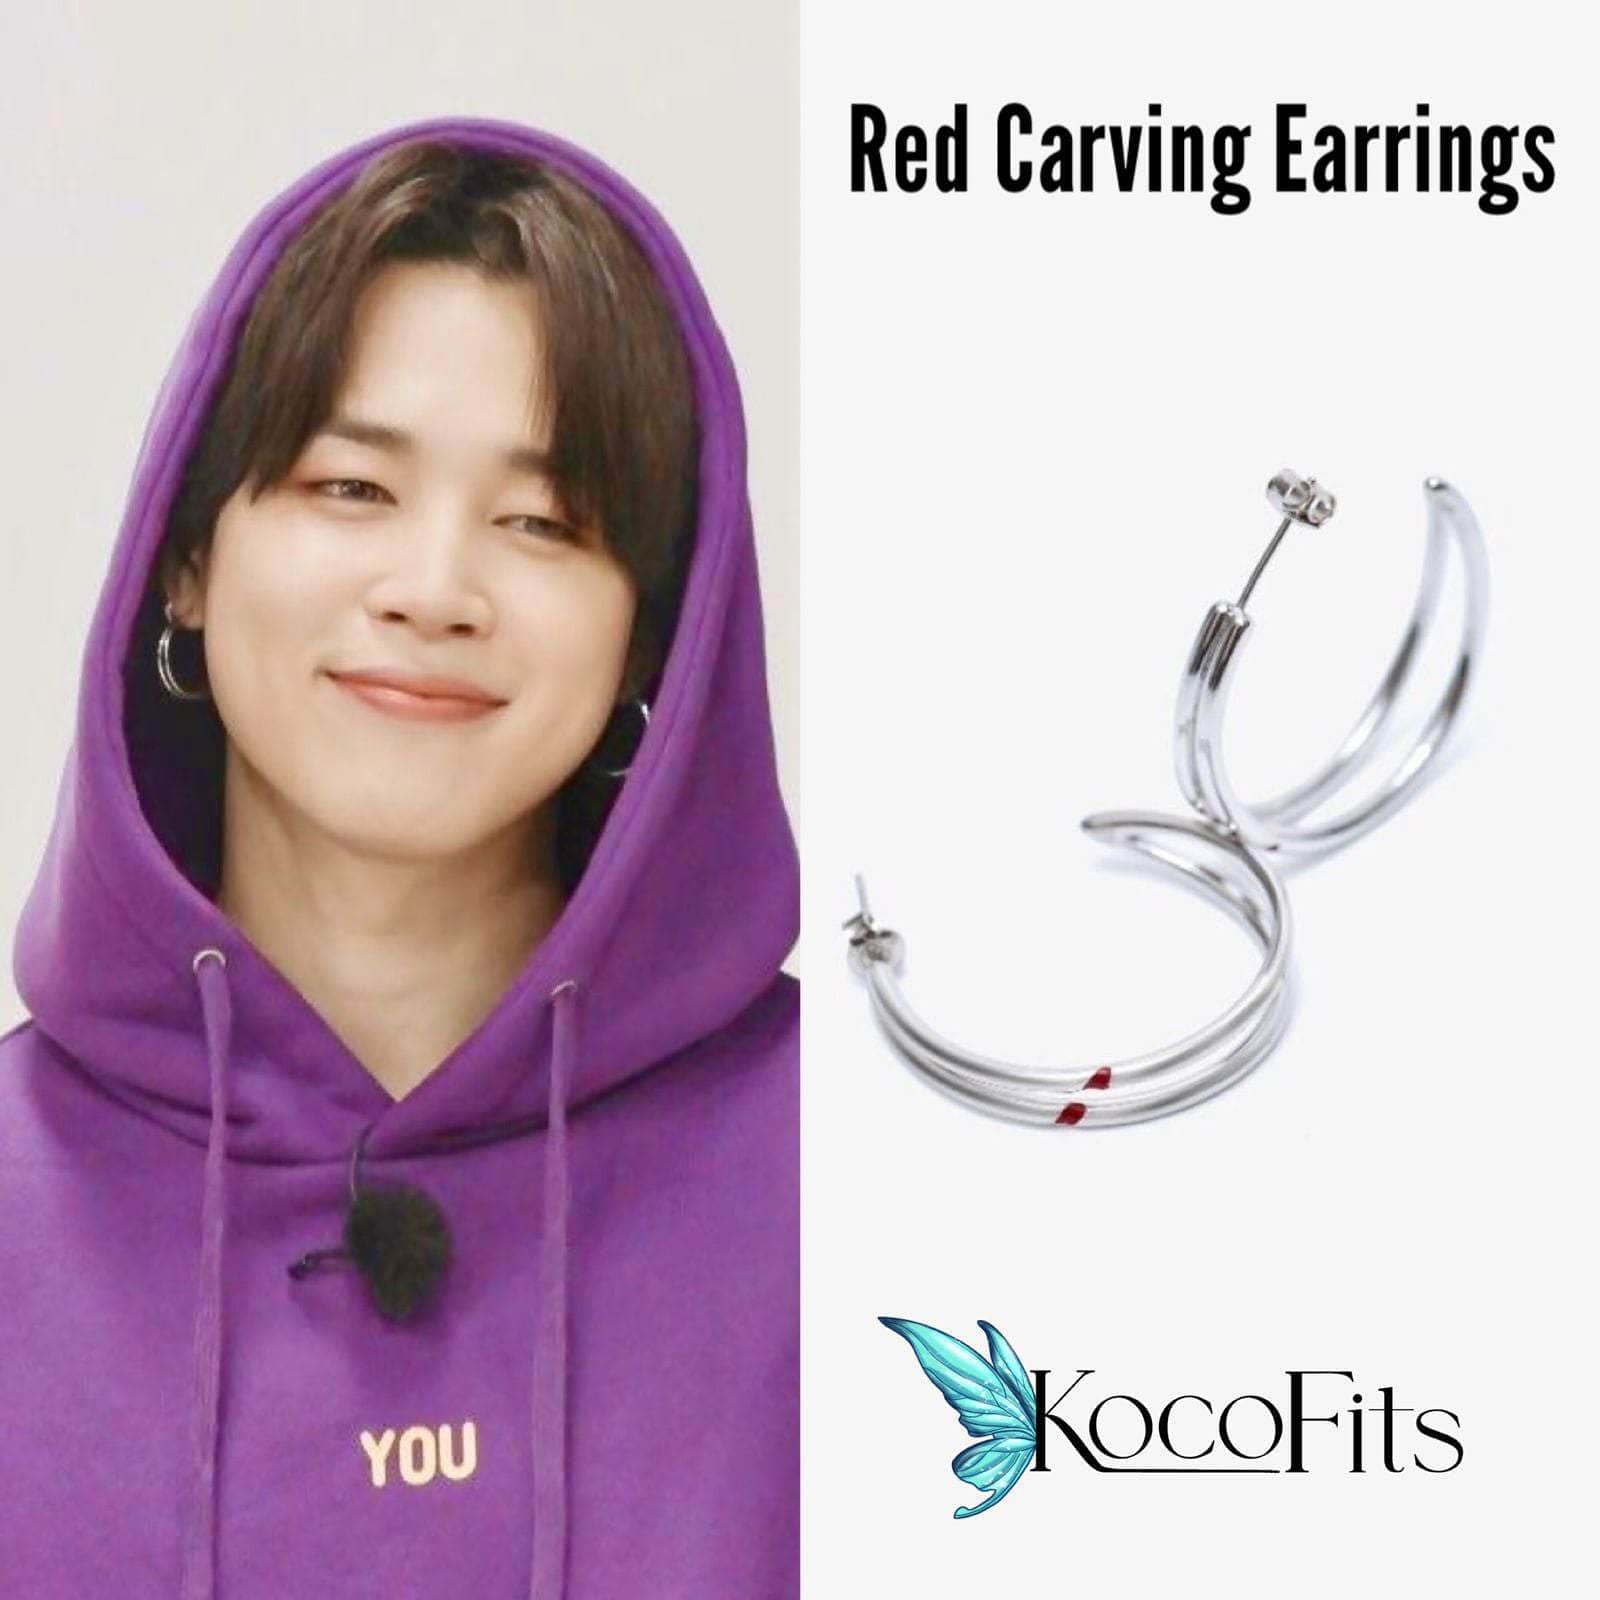 BTS JIMIN RED CARVING EARRING ジミン ピアス www.krzysztofbialy.com